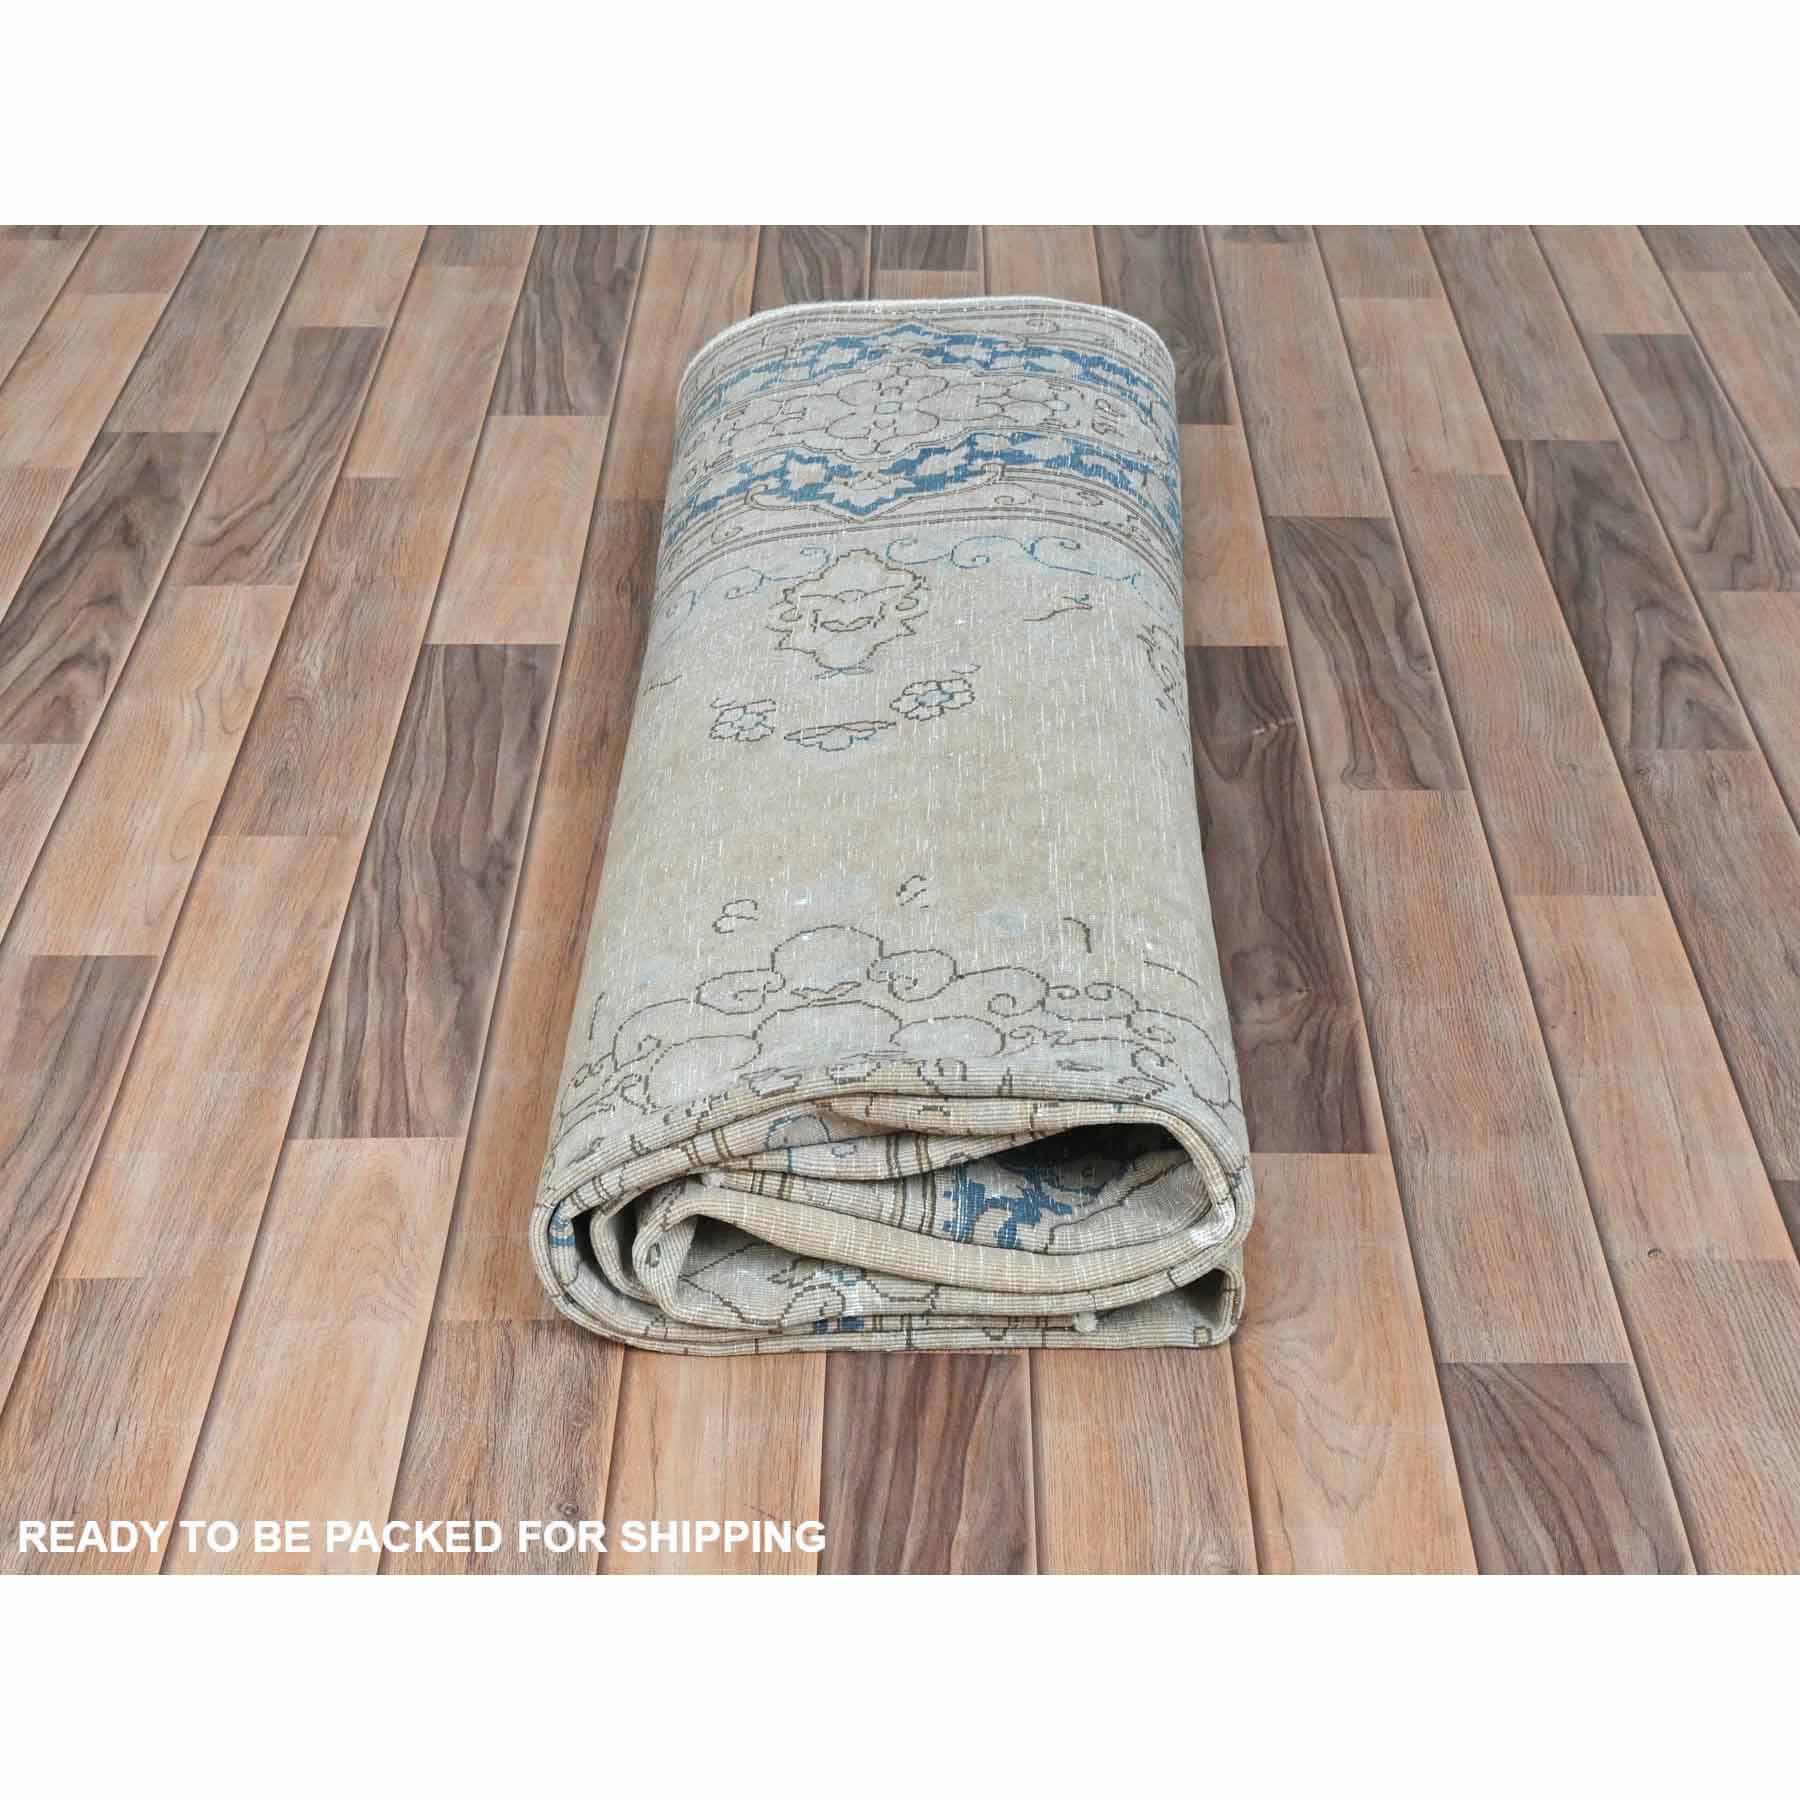 Persian-Hand-Knotted-Rug-409700